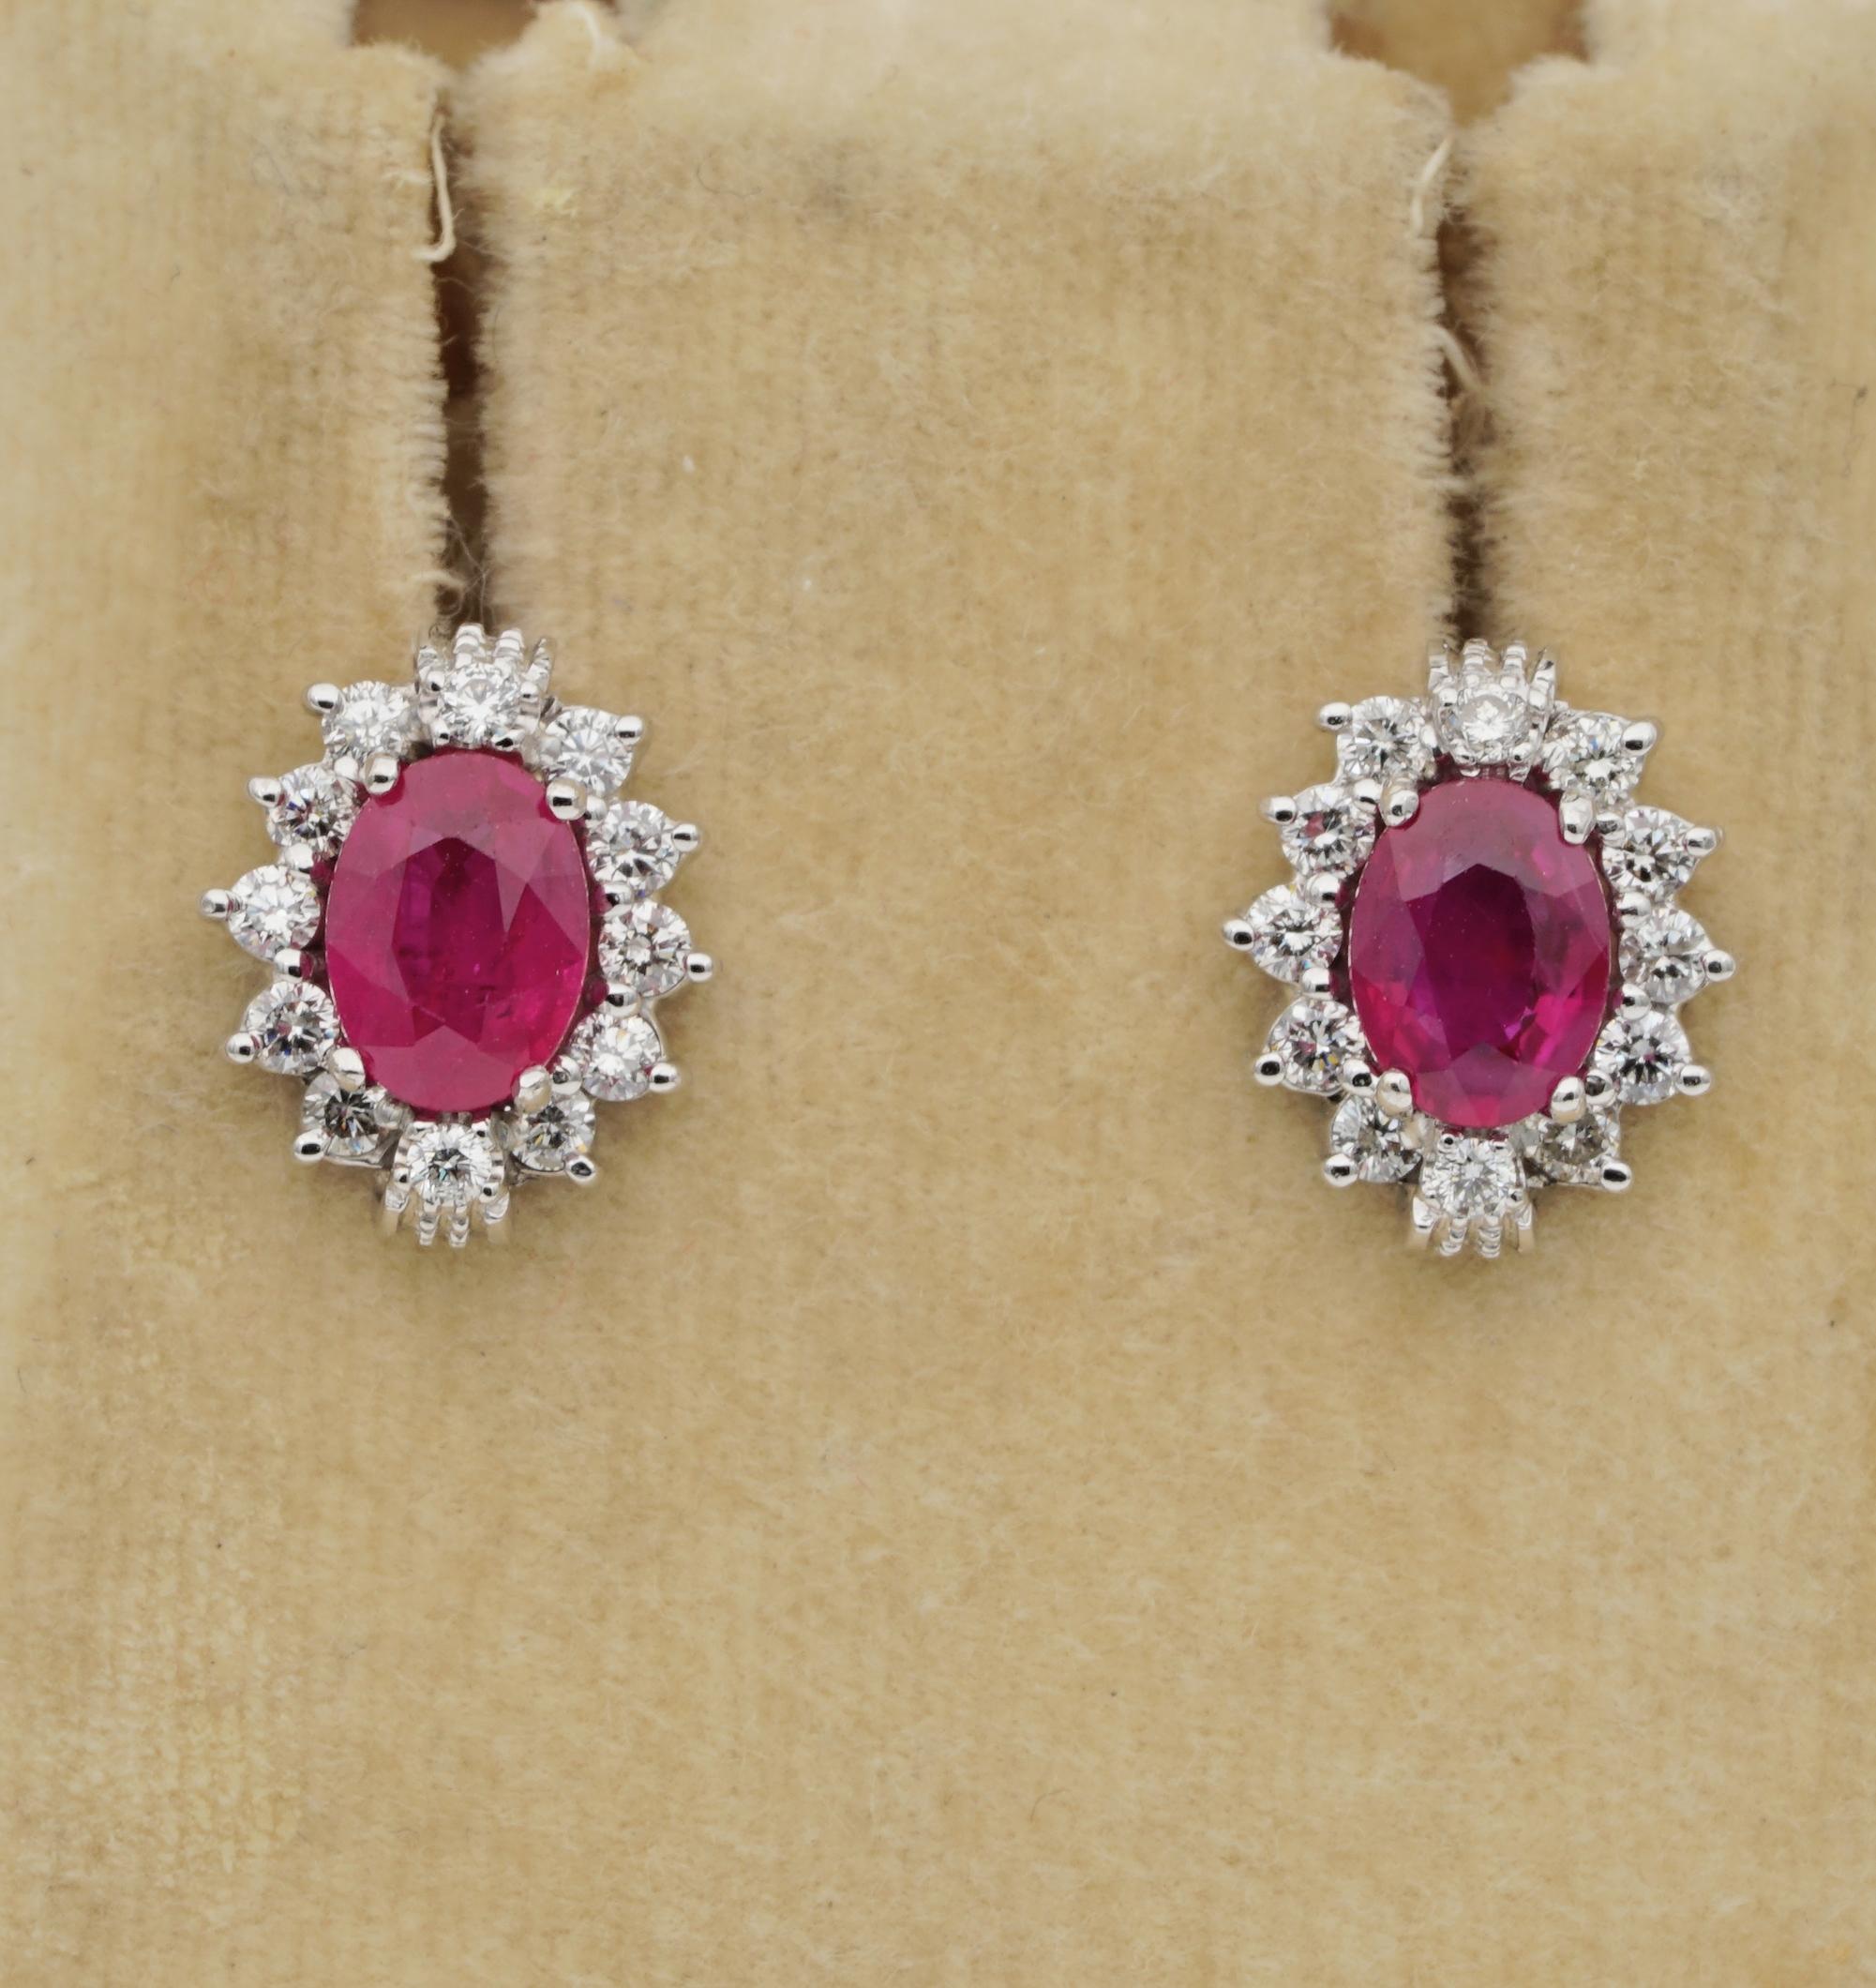 Ruby Passion!

Versatile, captivating, classy halo style, vintage Ruby & Diamond Stud earrings
Will adorn your ears with cheerful red Colour and sparkle in a easy version always charming and elegant suitable for any occasion
Vintage 1960 ca, hand